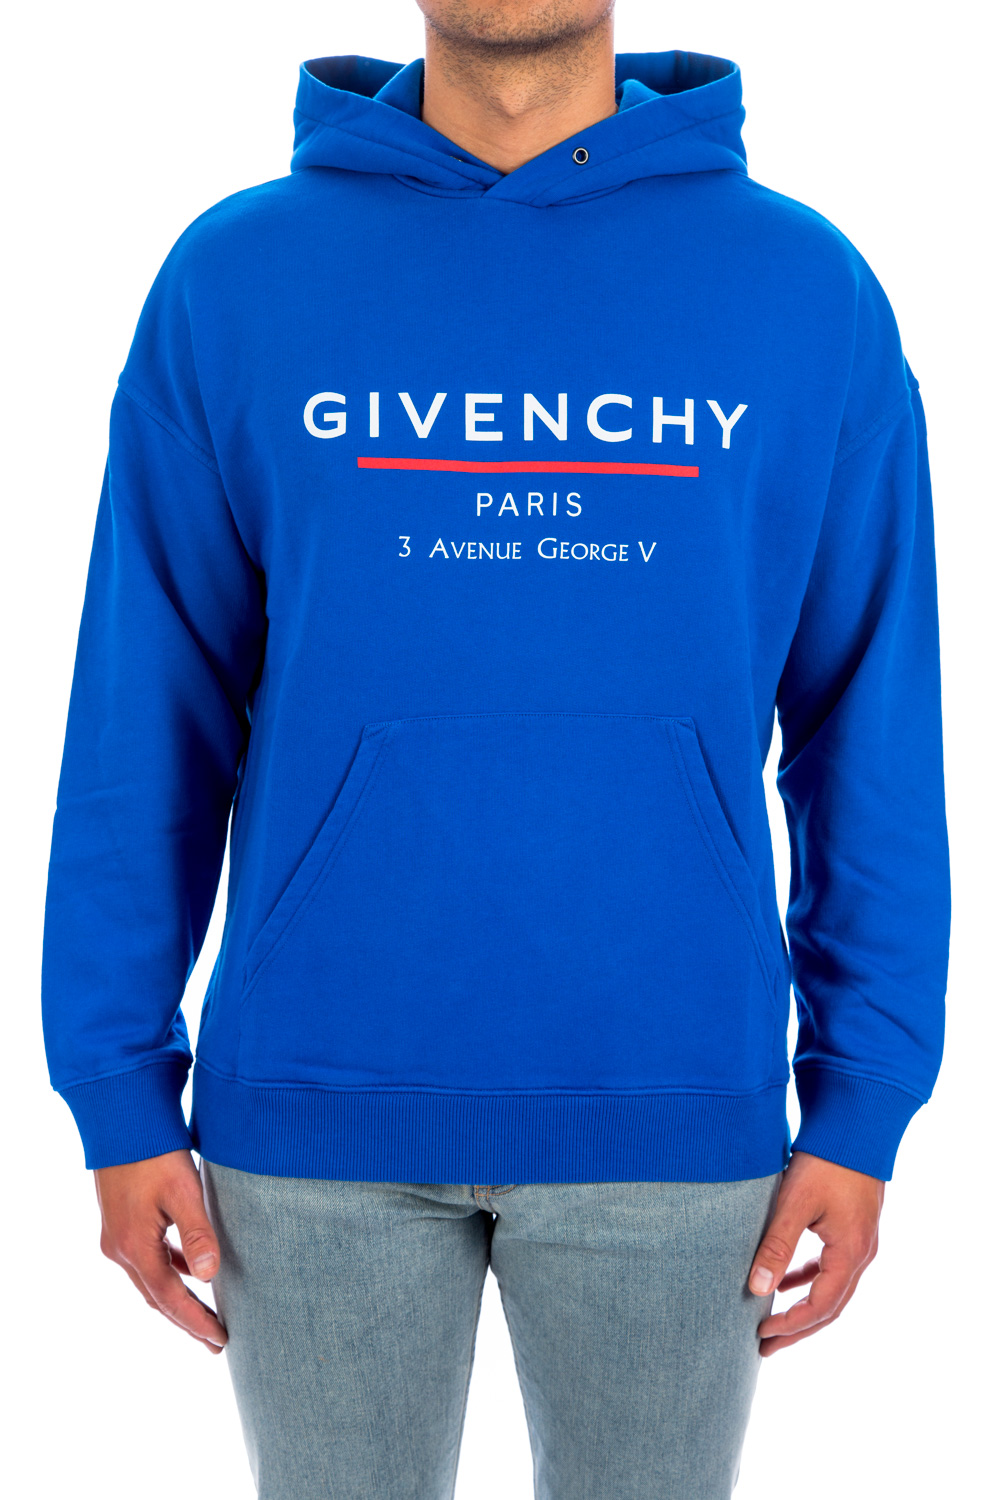 Total 45+ imagen sky blue givenchy hoodie - Abzlocal.mx